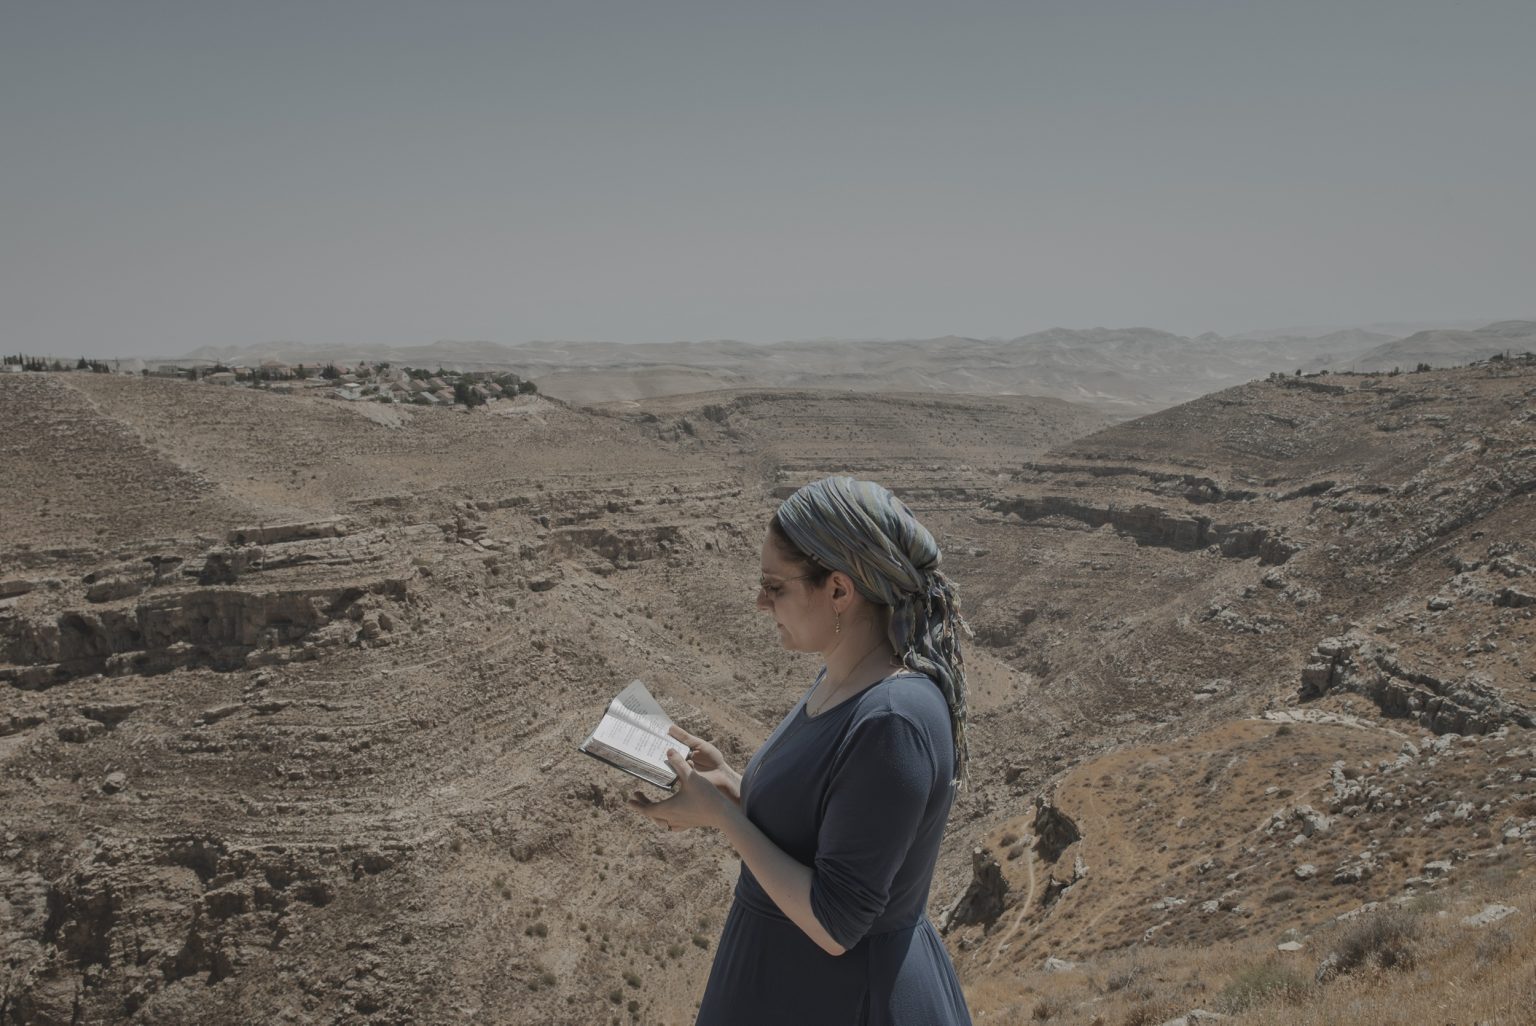 16.15604503 Daniella Levy, a novelist and self-described "ambivalent settler," at the Tekoa settlement in the occupied West Bank, Aug. 31, 2021.  Two journalists for The New York Times drove the length of Israel to discover what it means to be Israeli today. They met a kaleidoscope of people, searching for belonging but far apart on how to find it. (Laetitia Vancon/The New York Times)     <span style="color: #ff0000">*** SPECIAL   FEE   APPLIES ***</span> *** Local Caption *** 16.15604503